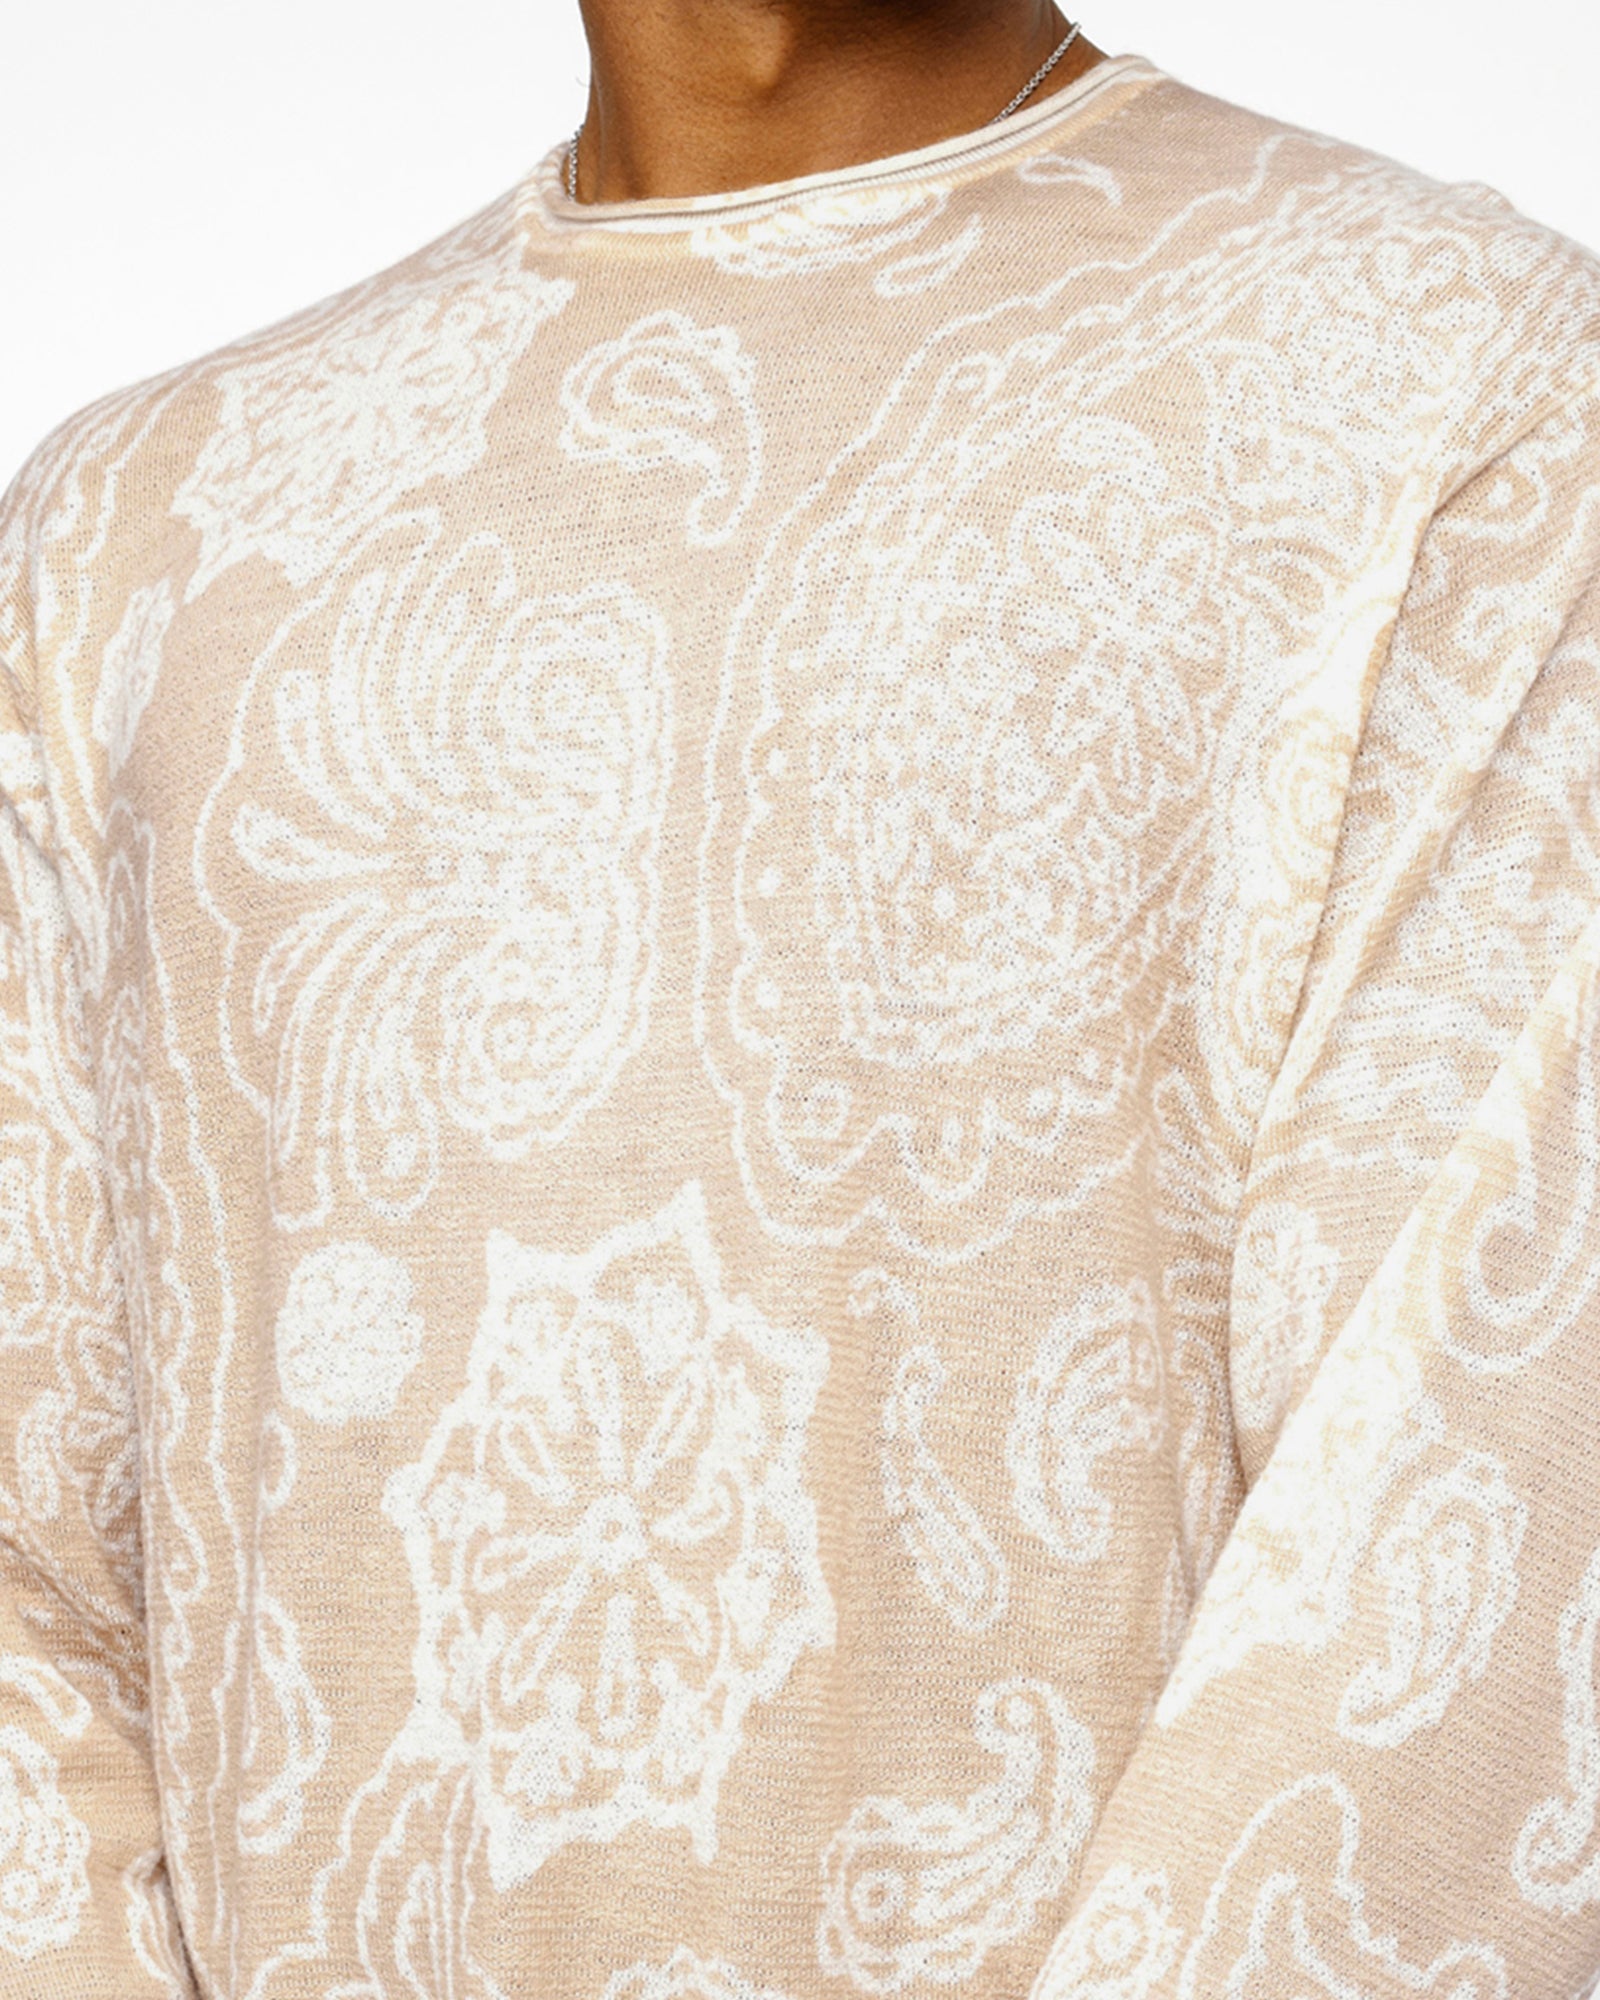 STÜSSY PAISLEY SWEATER NATURAL SWEATER